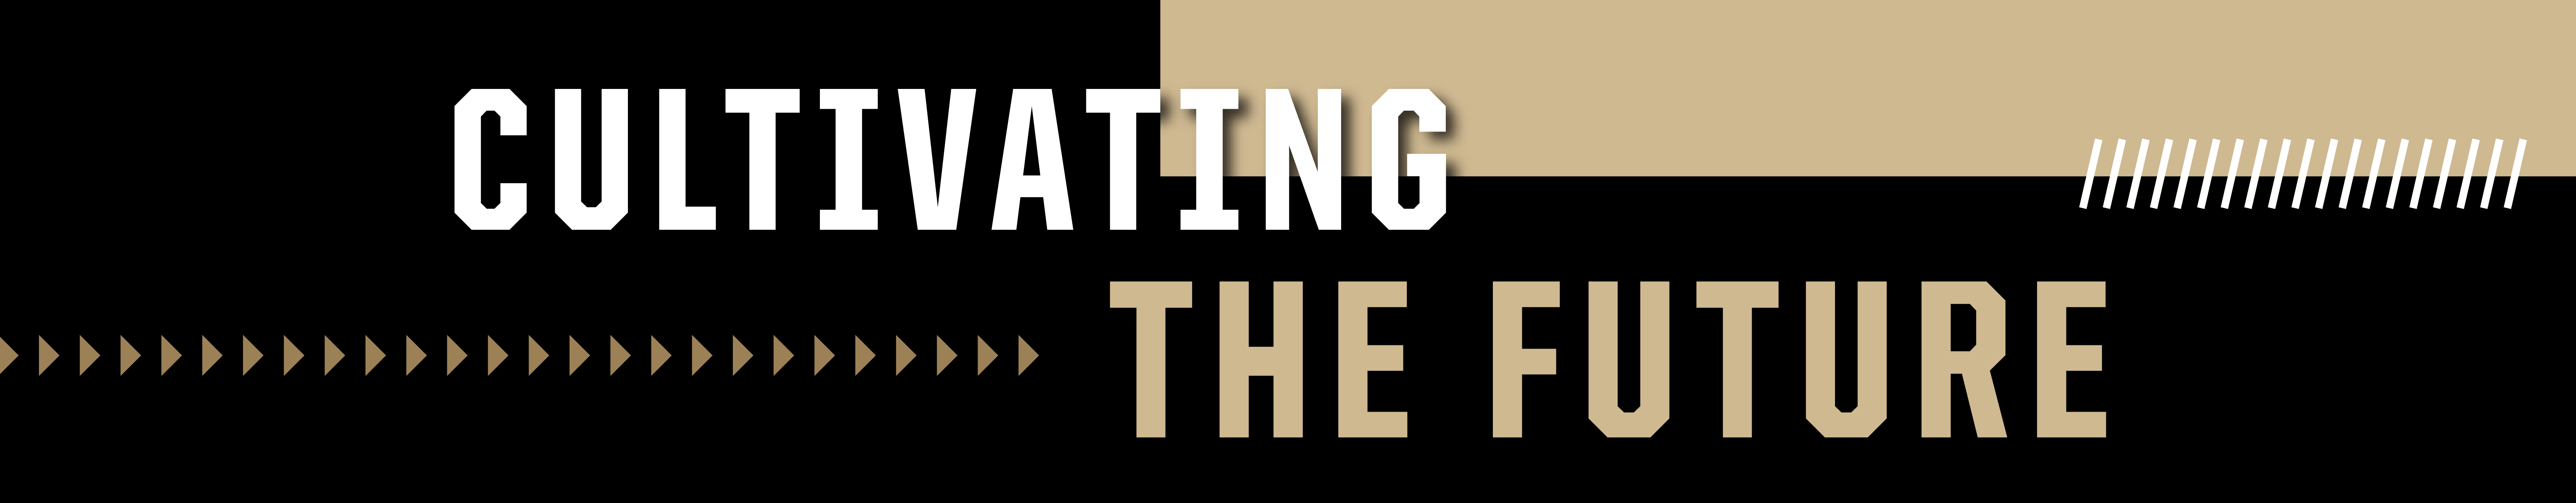 Cultivating the Future Banner Graphic